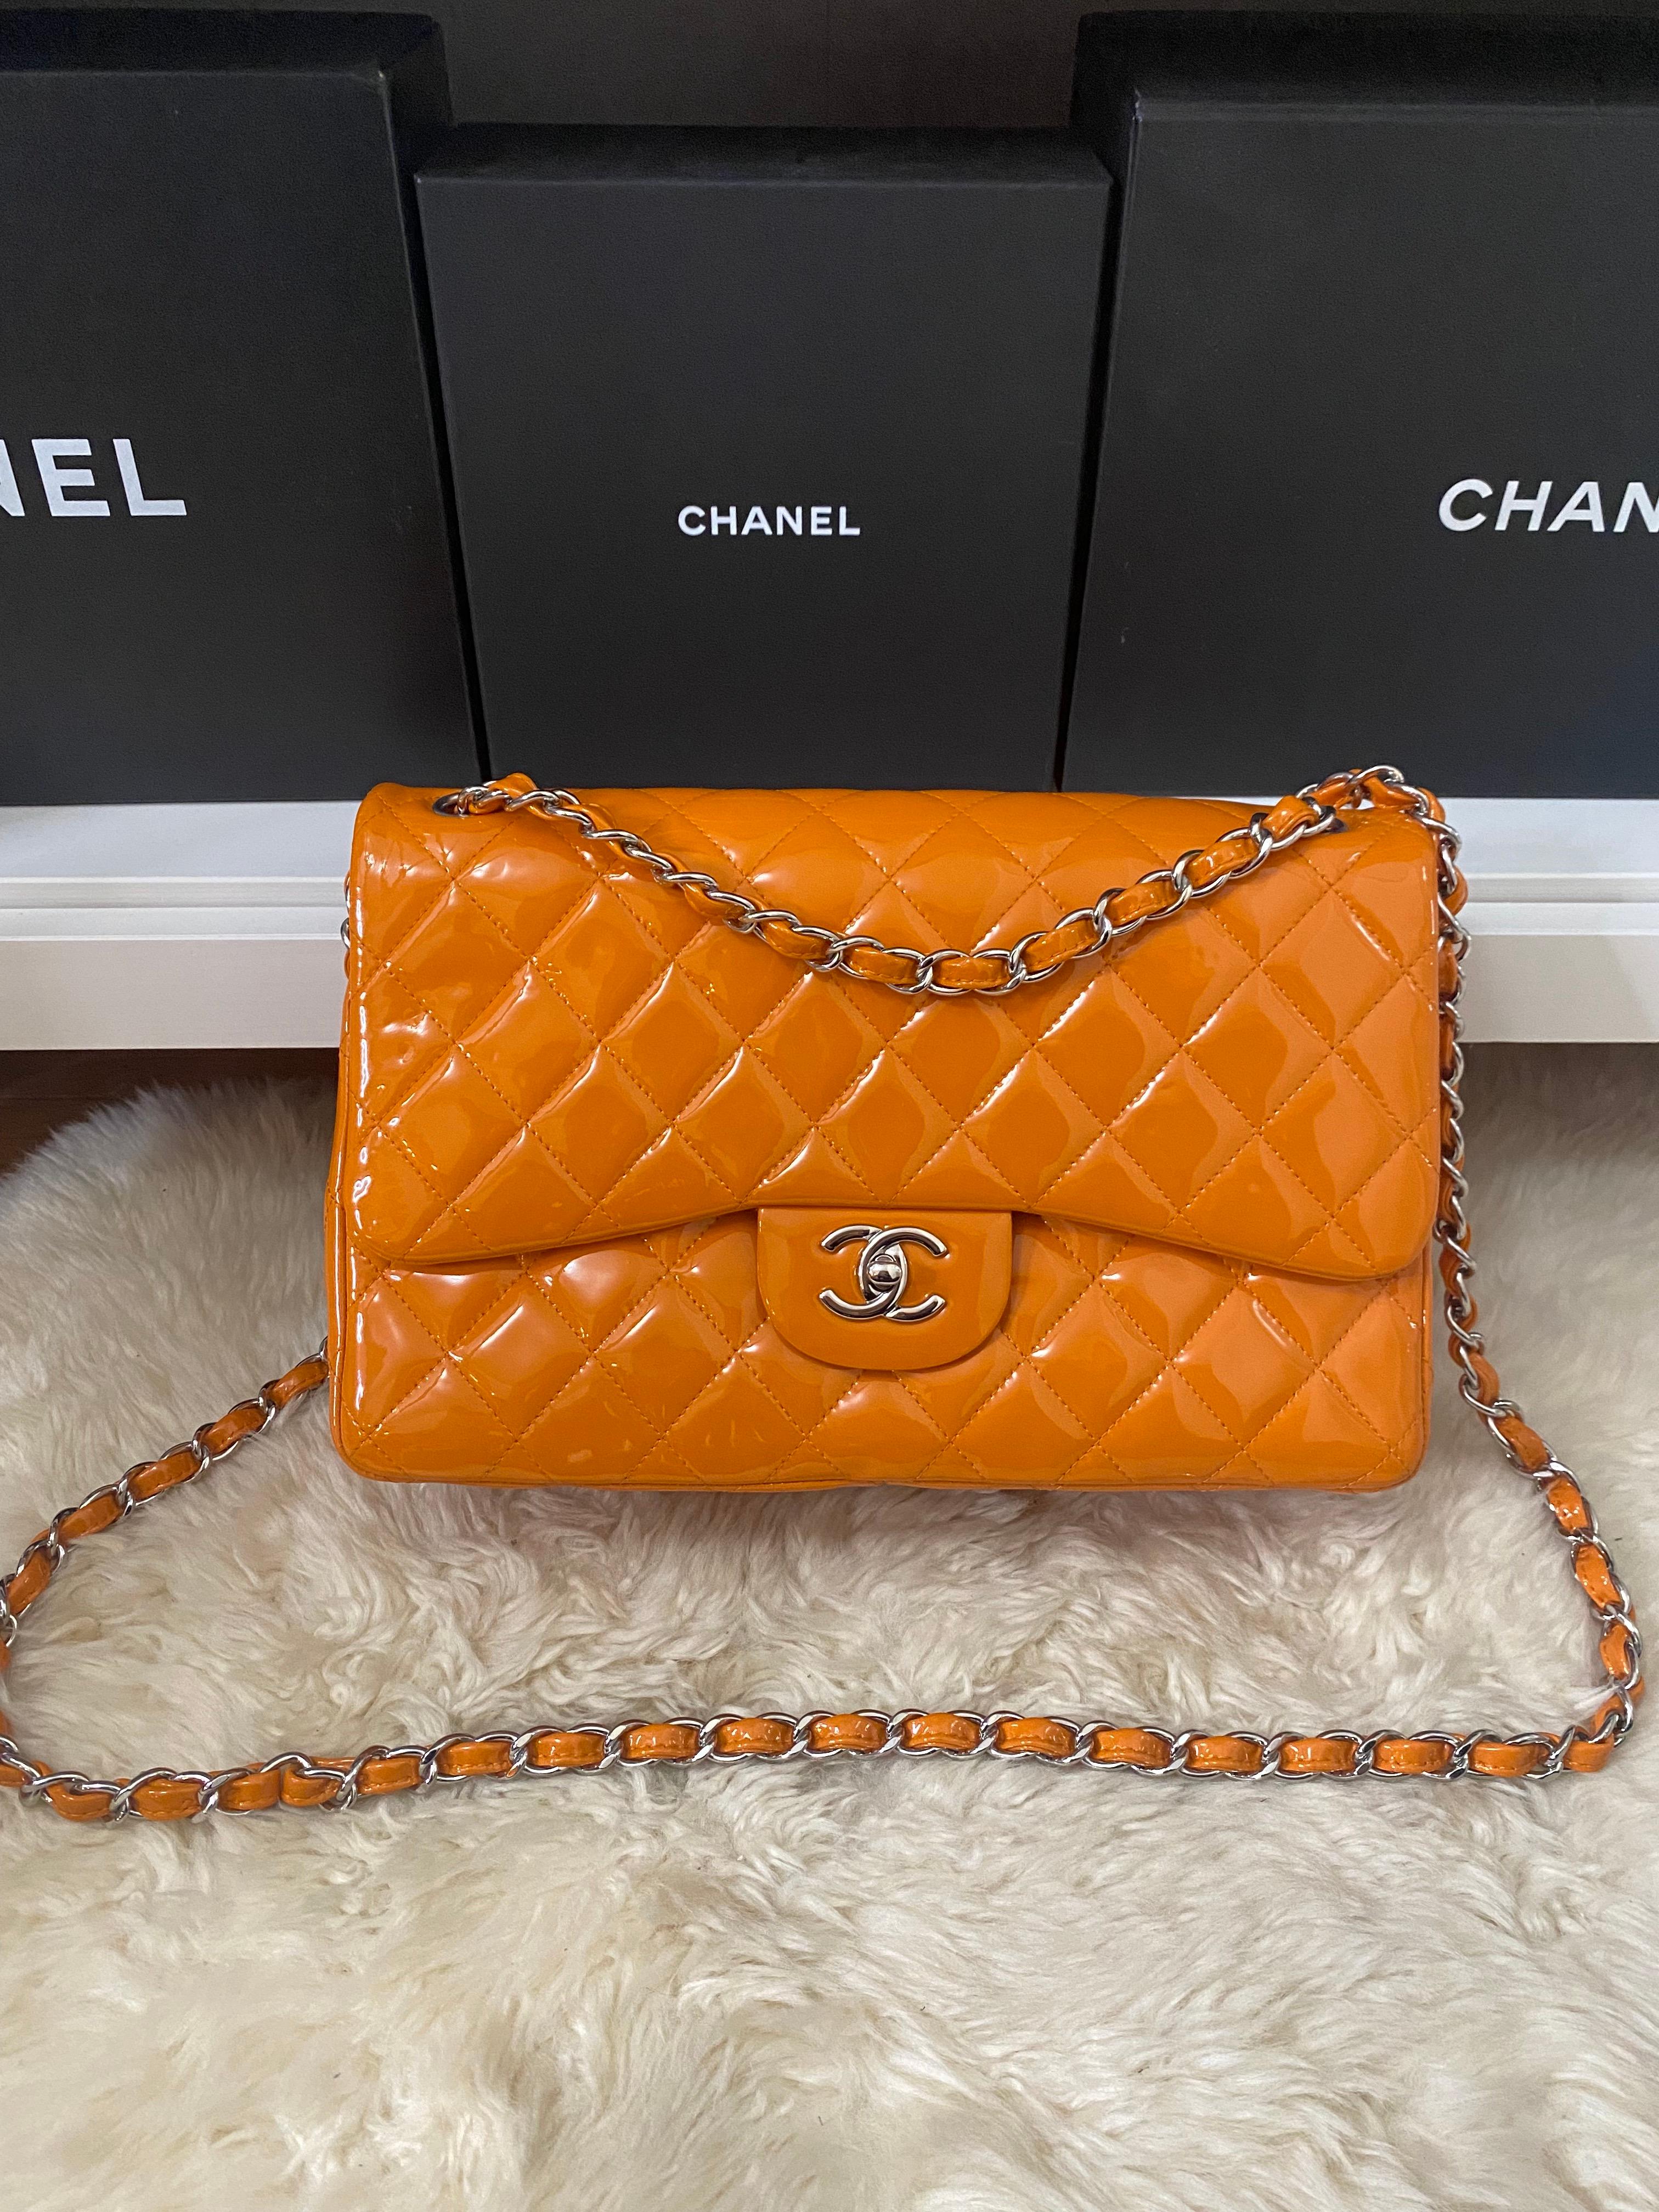 Chanel Classic Double Flap Jumbo Patent Orange

Exterior Color: Orange
Interior Color: Orange
Exterior Material: Patent Leather
Interior Material: Leather
Hardware Color: Silver
Accessories: No Accessories
Serial: 20 series
SIZE AND FIT: 12